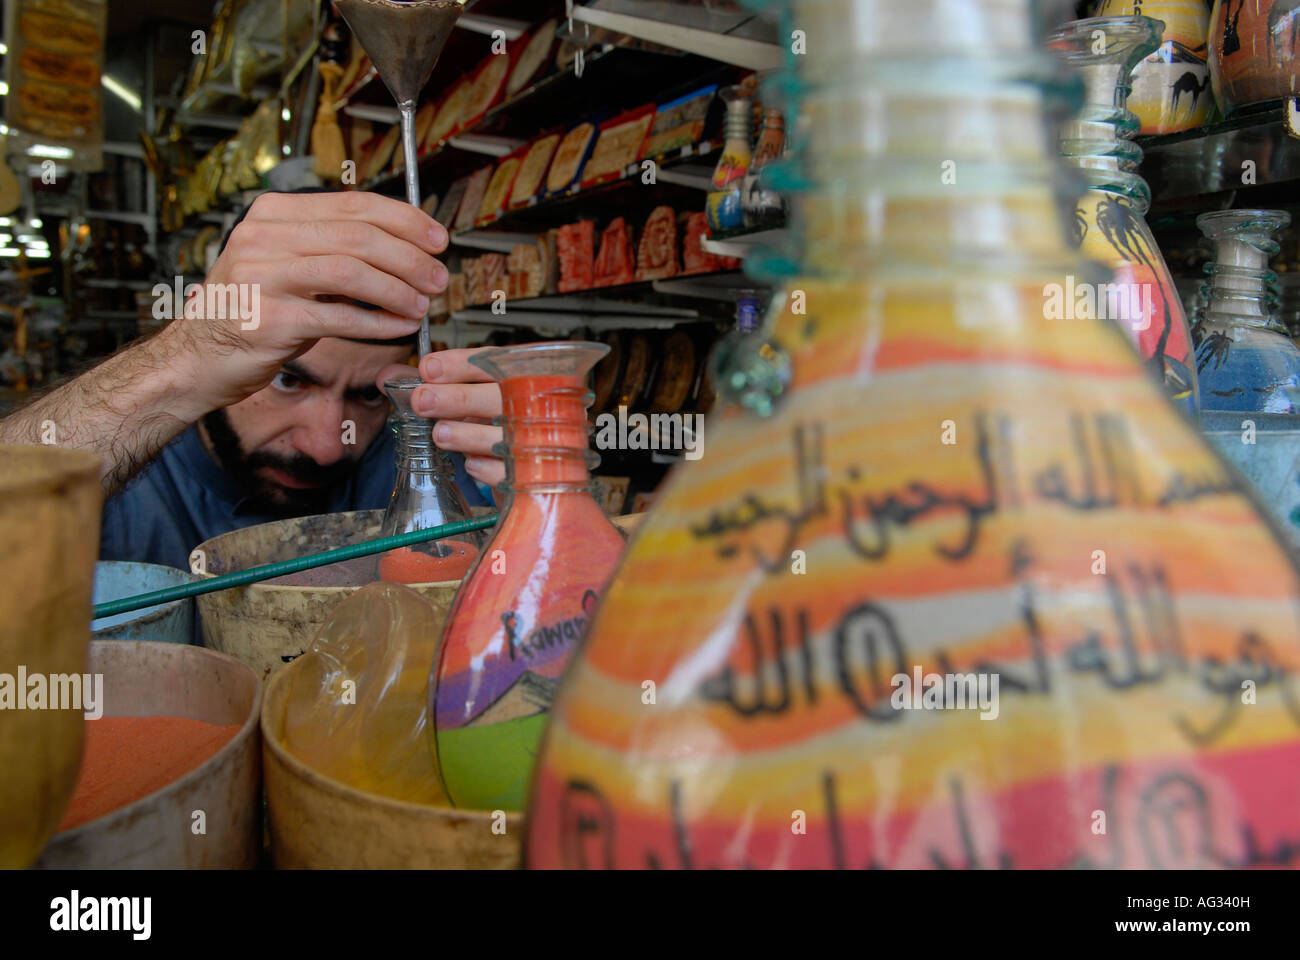 Jordanian man adds colored sand to a decorated bottle filled with multicolored sand rocks that is found in Petra in a souvenir shop in Amman Jordan Stock Photo